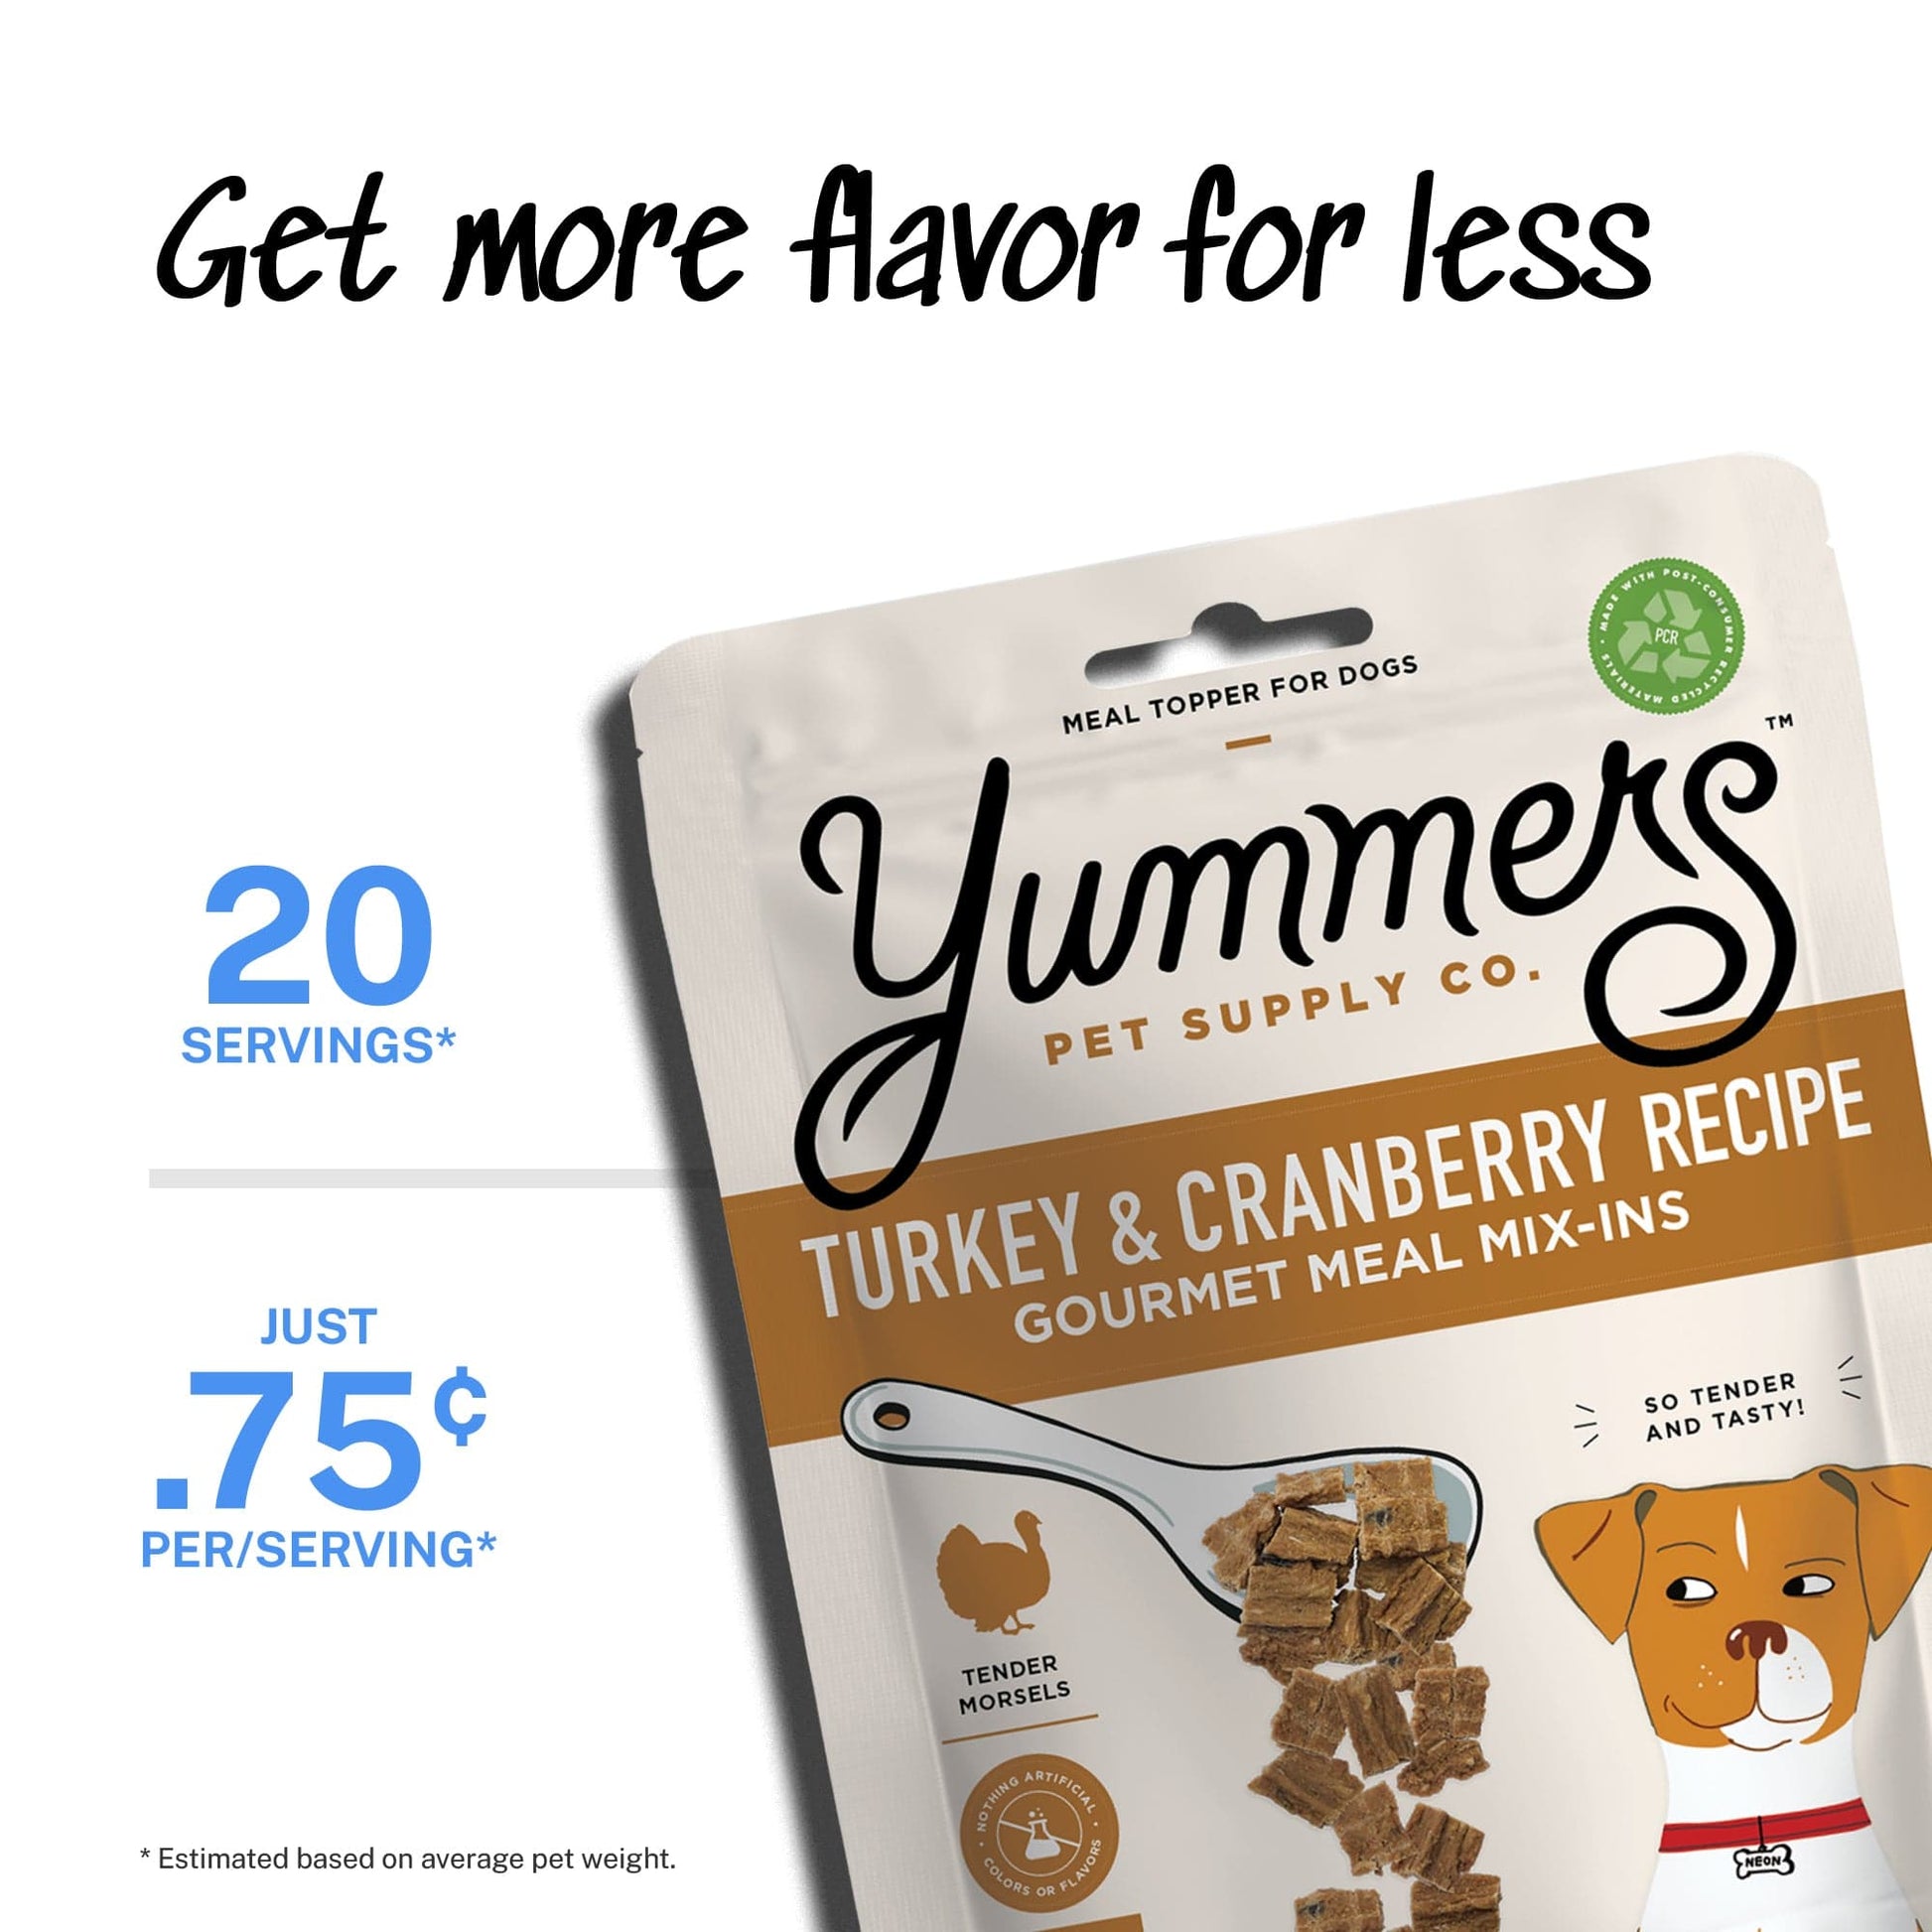 Get more flavor for less - 20 servings - just 75 cents per serving